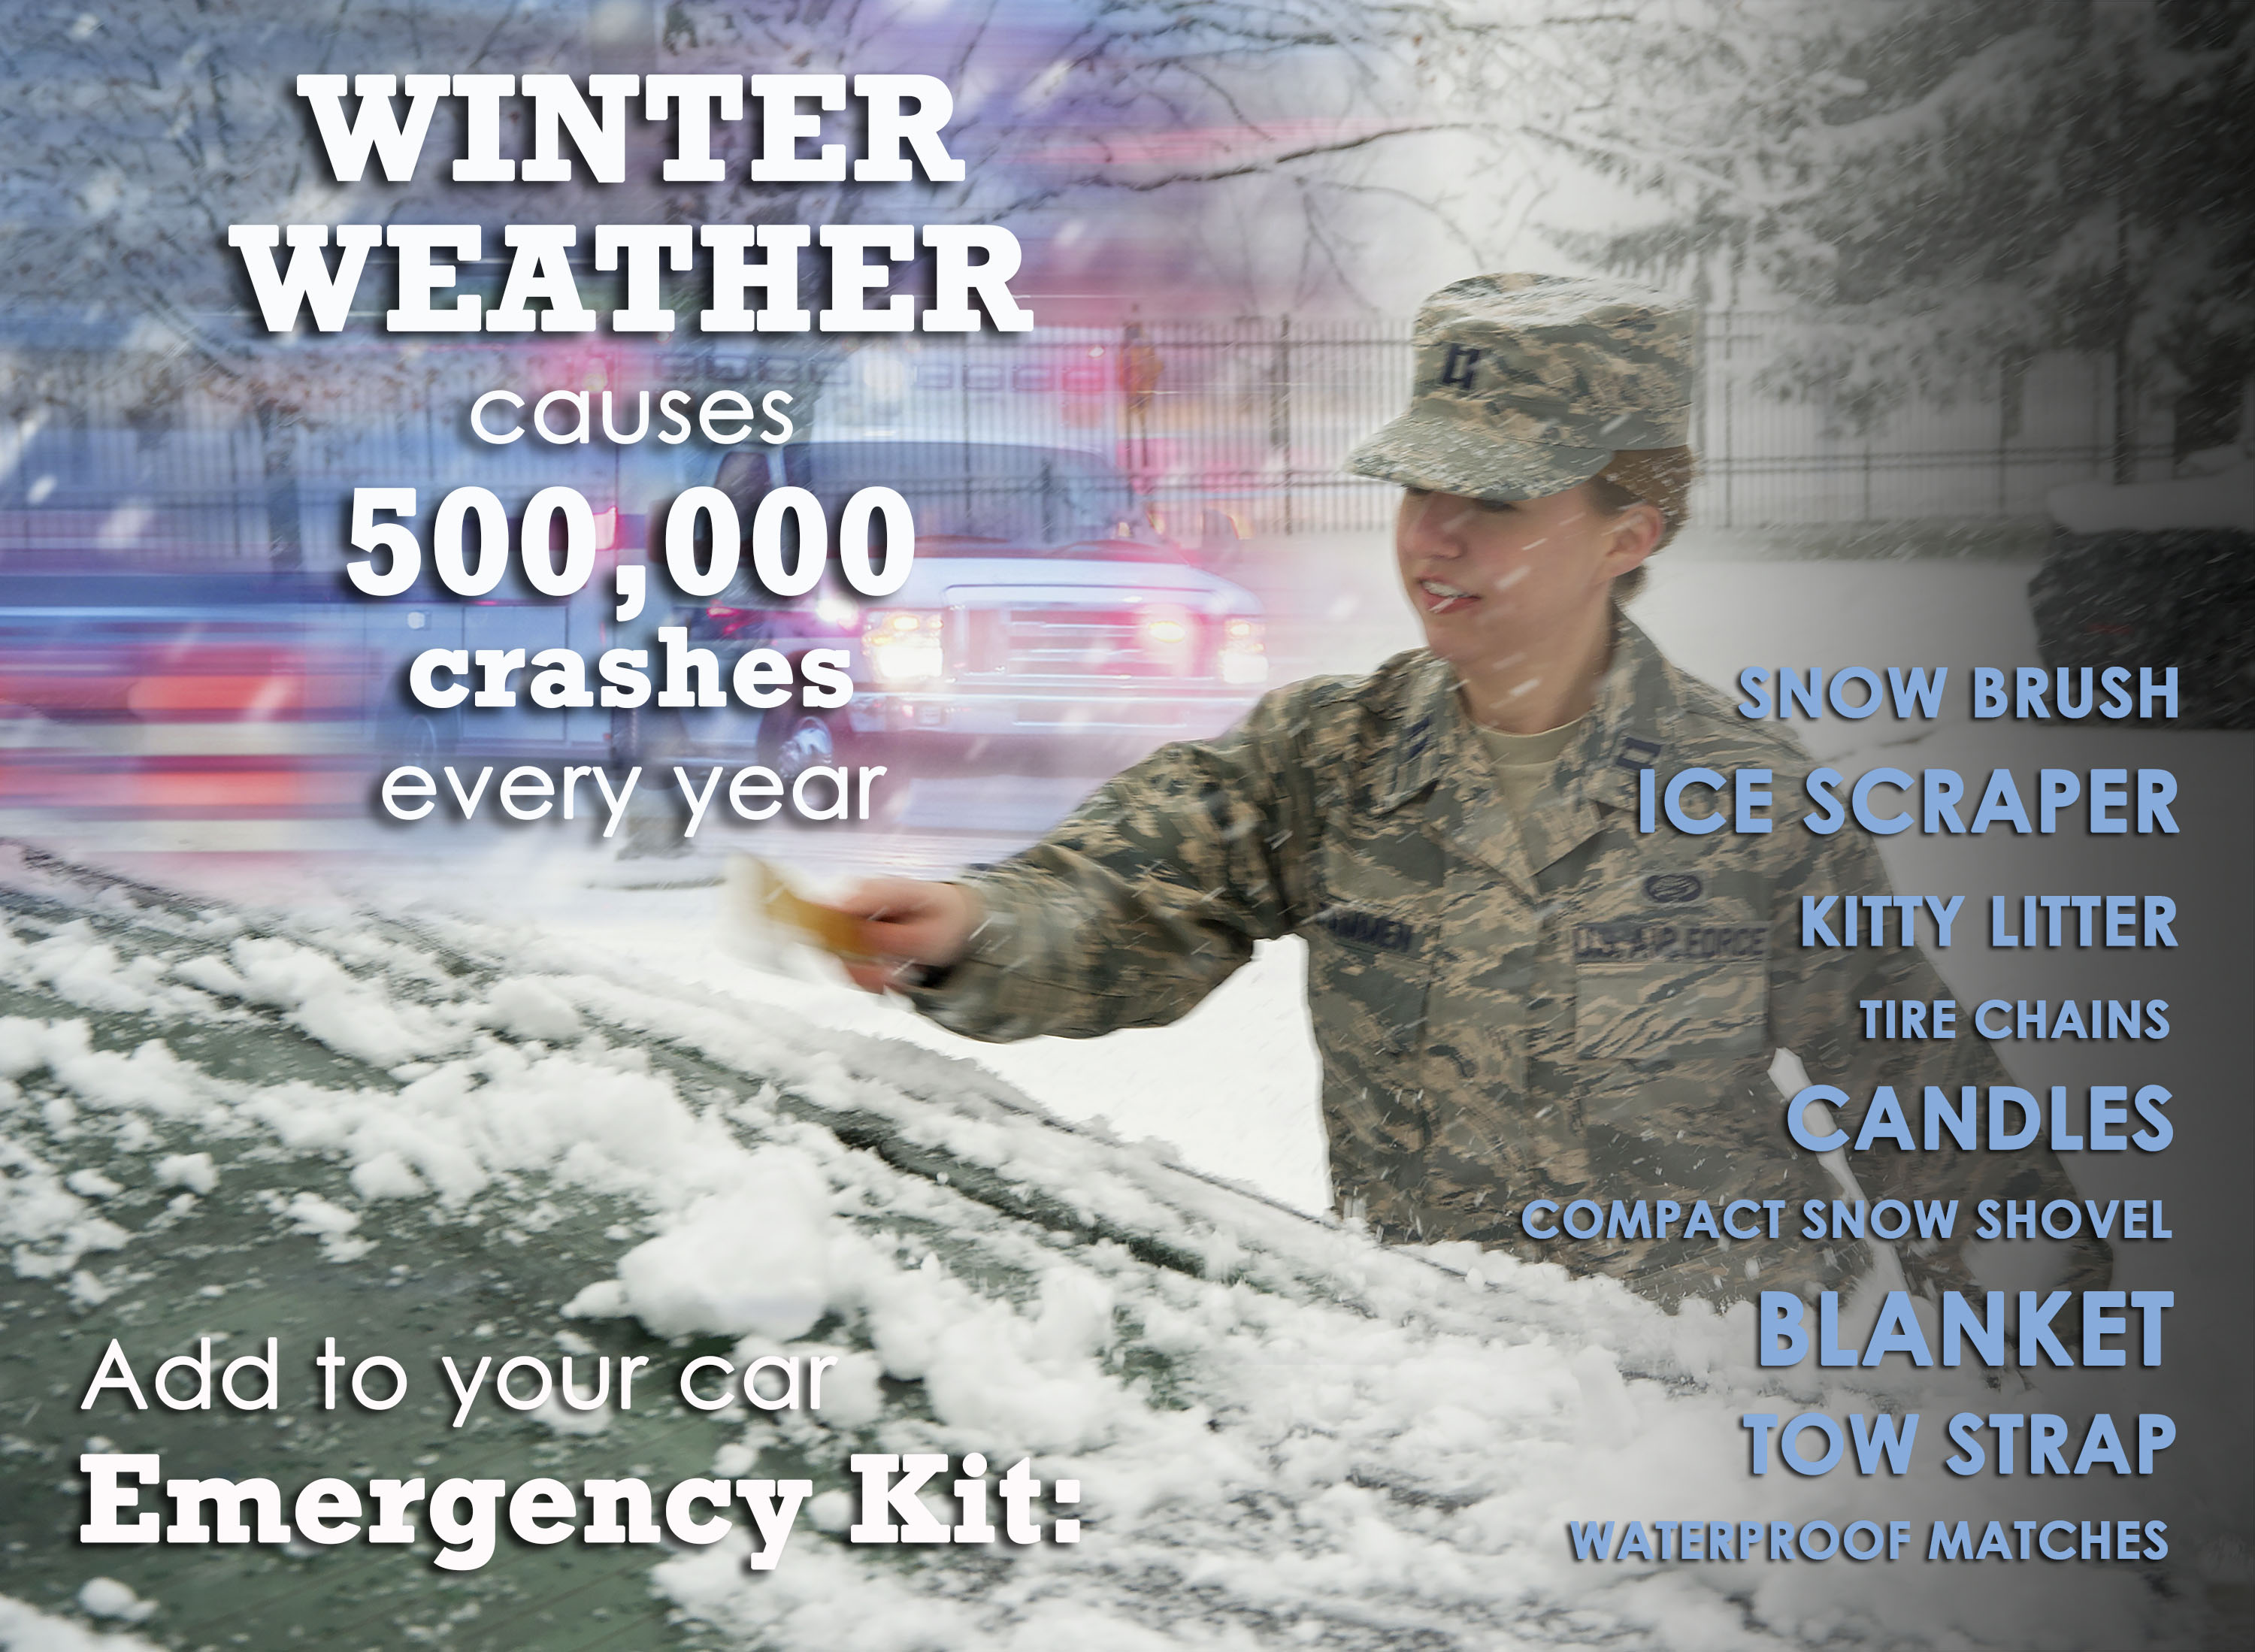 Winter Weather Statistics with female Air Force Captain cleaning snowy vehicle windshield